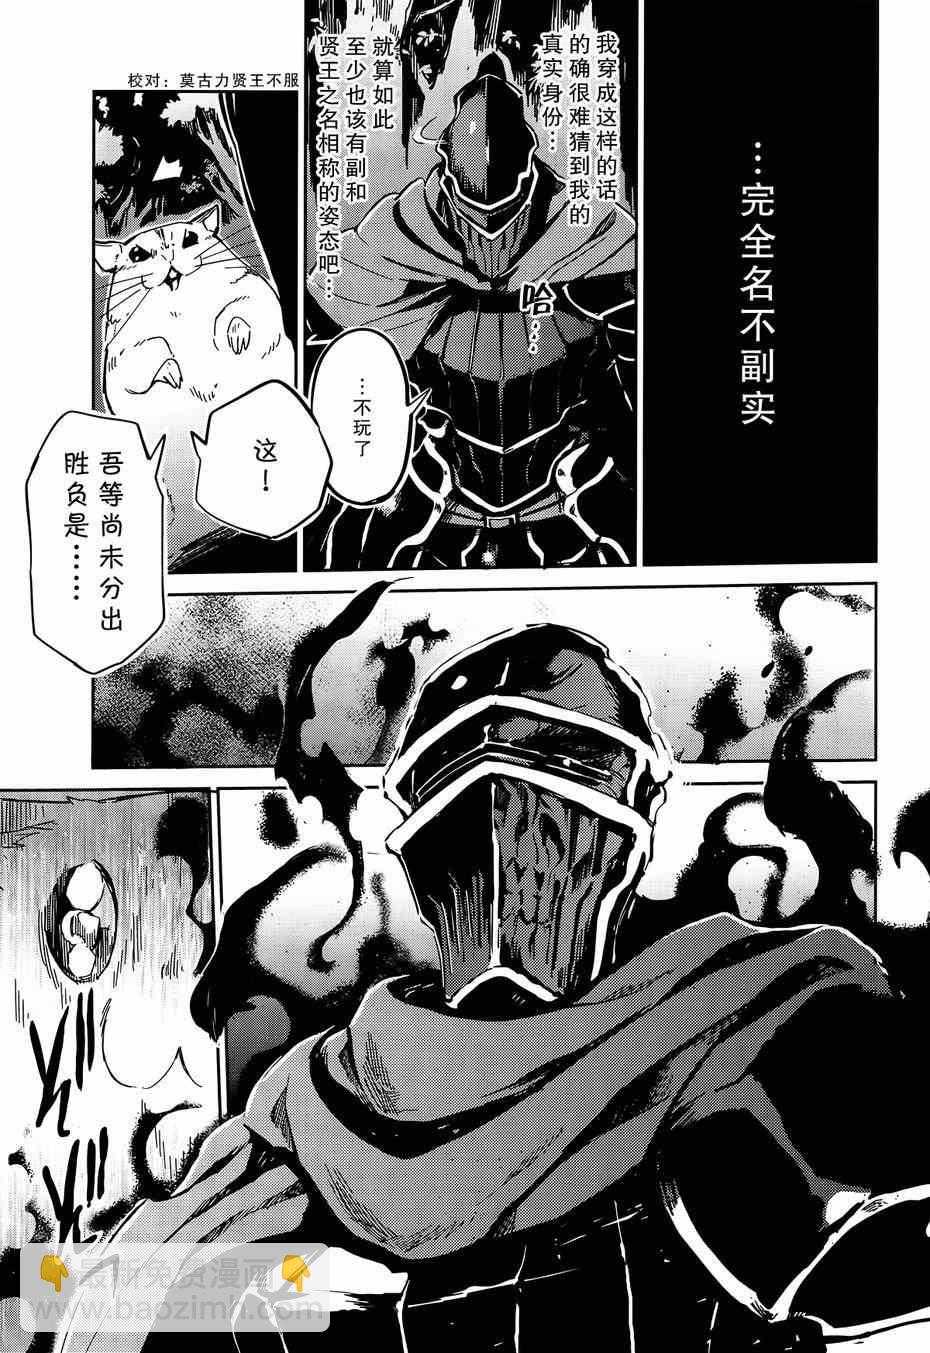 OVERLORD - 第7话 - 7